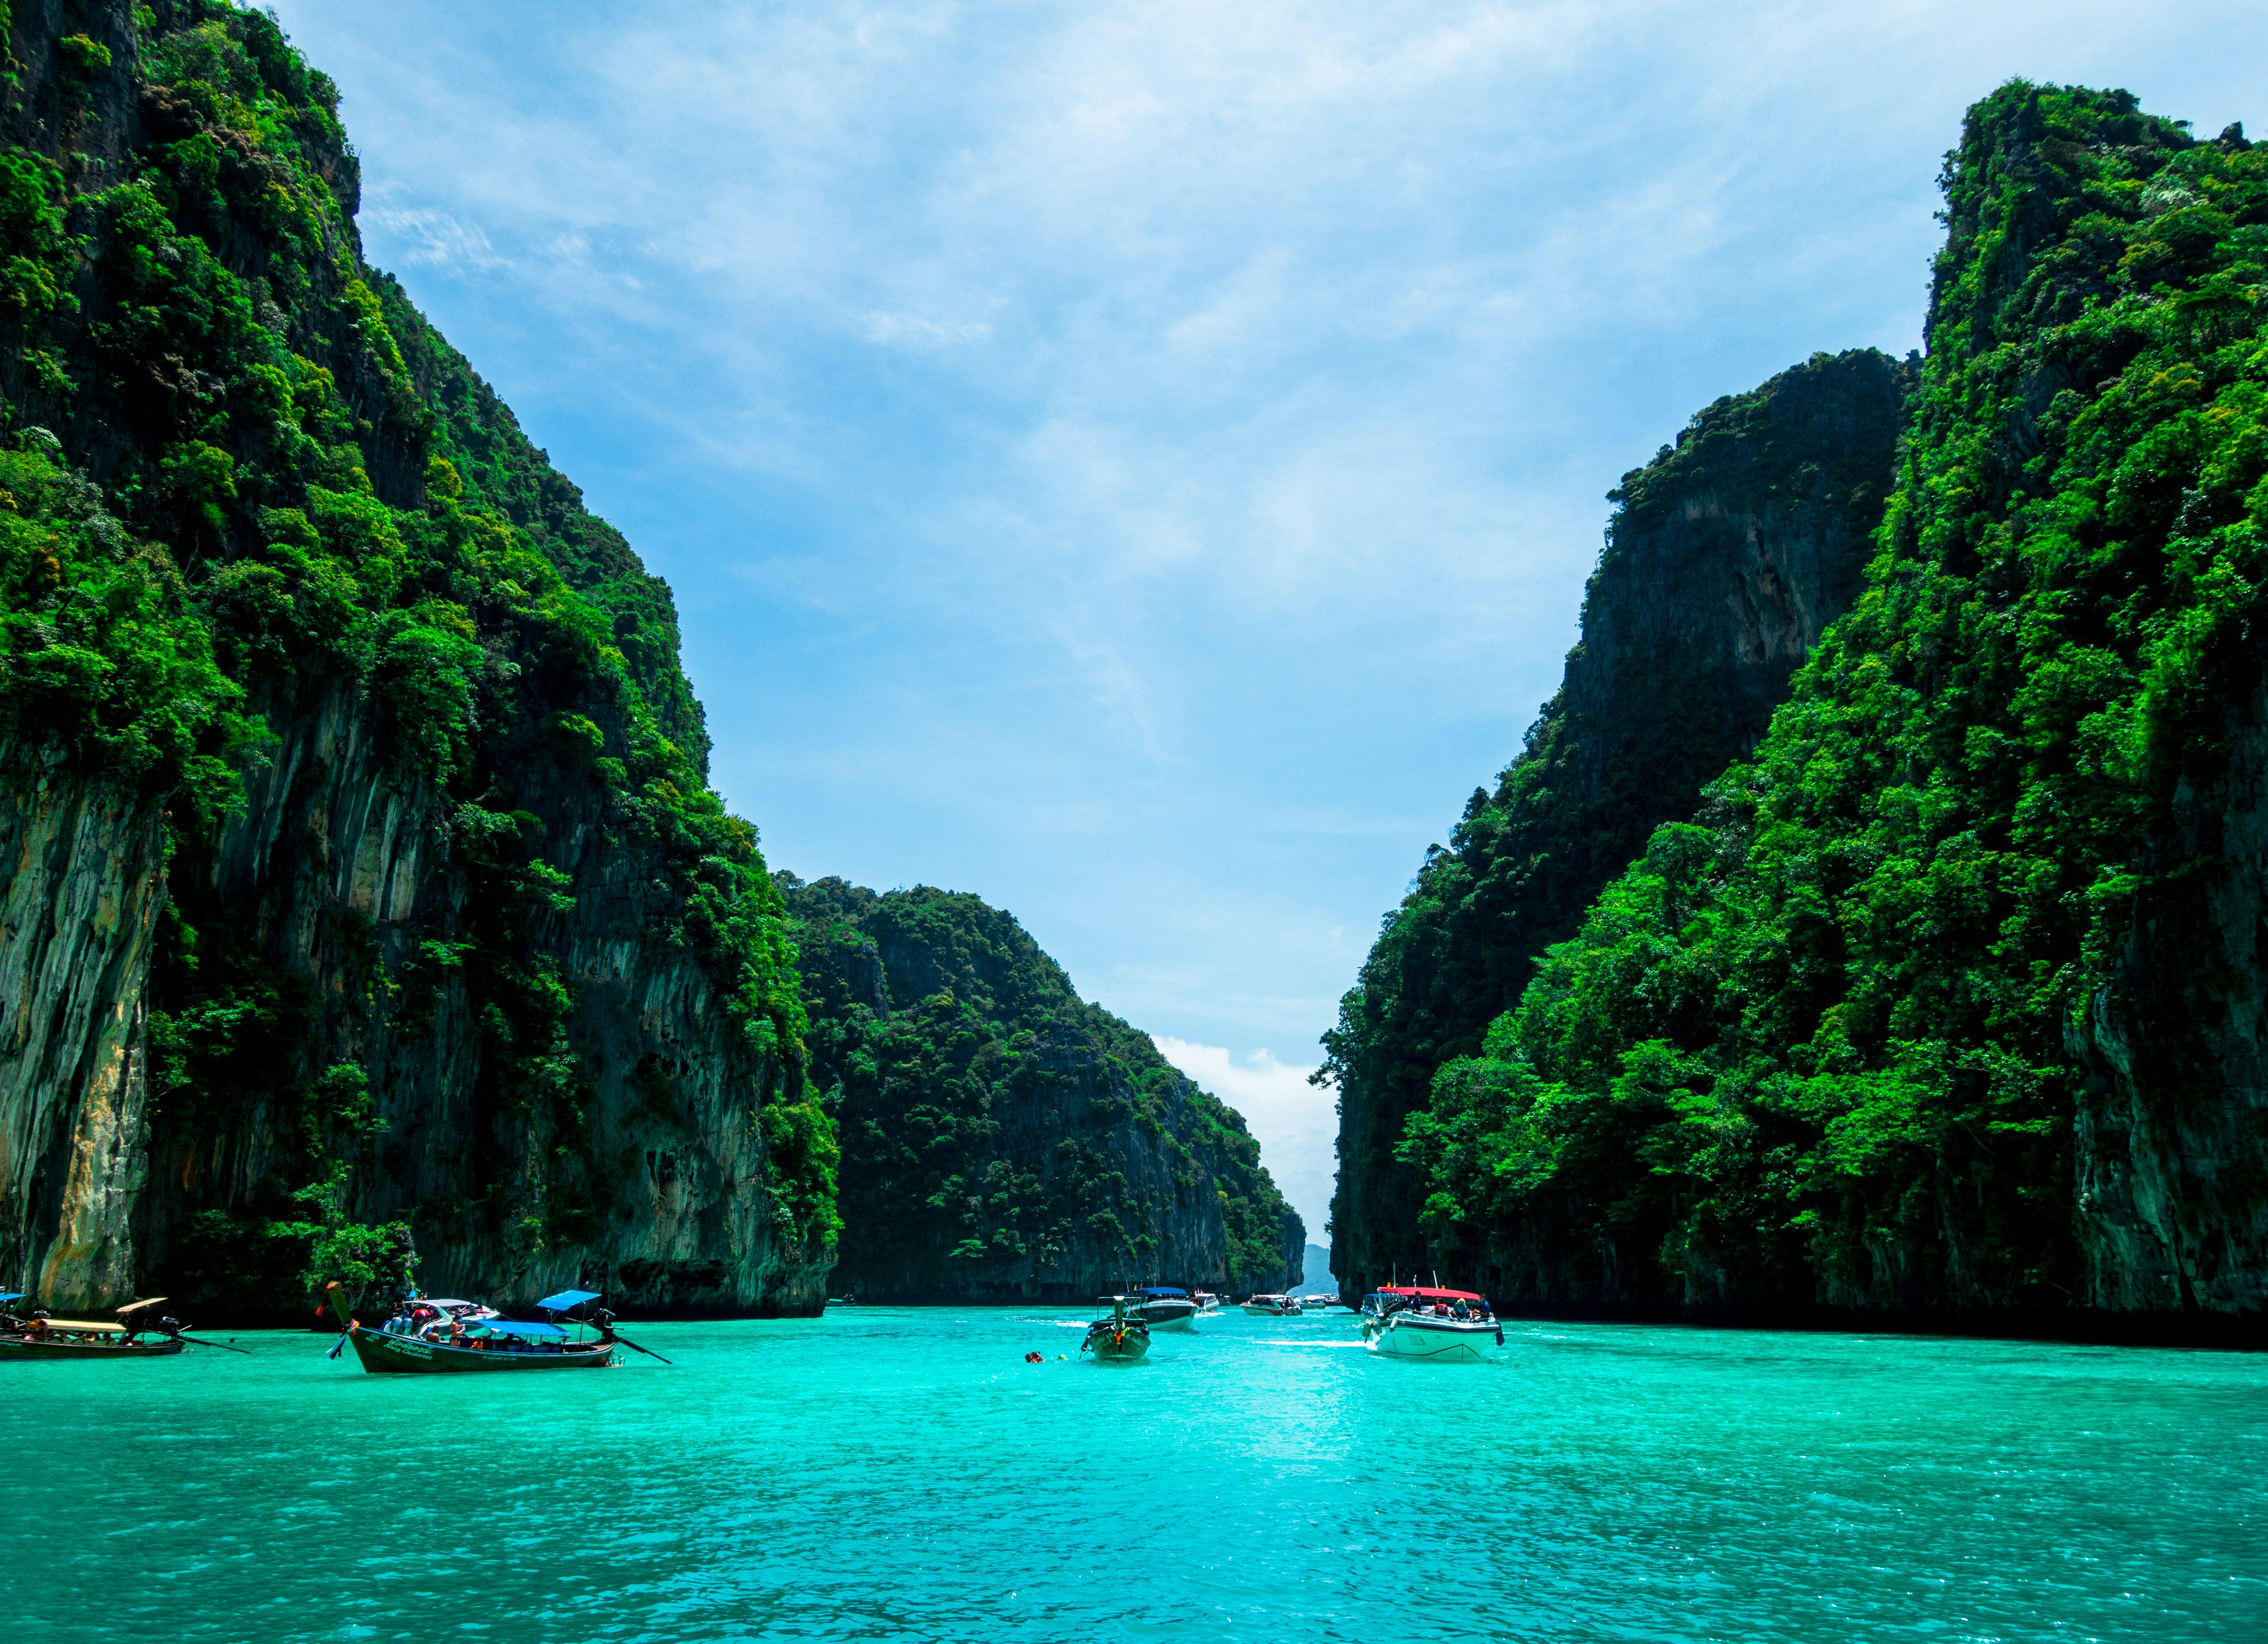 Phuket, Thailand: The Island You Can Escape to This Winter